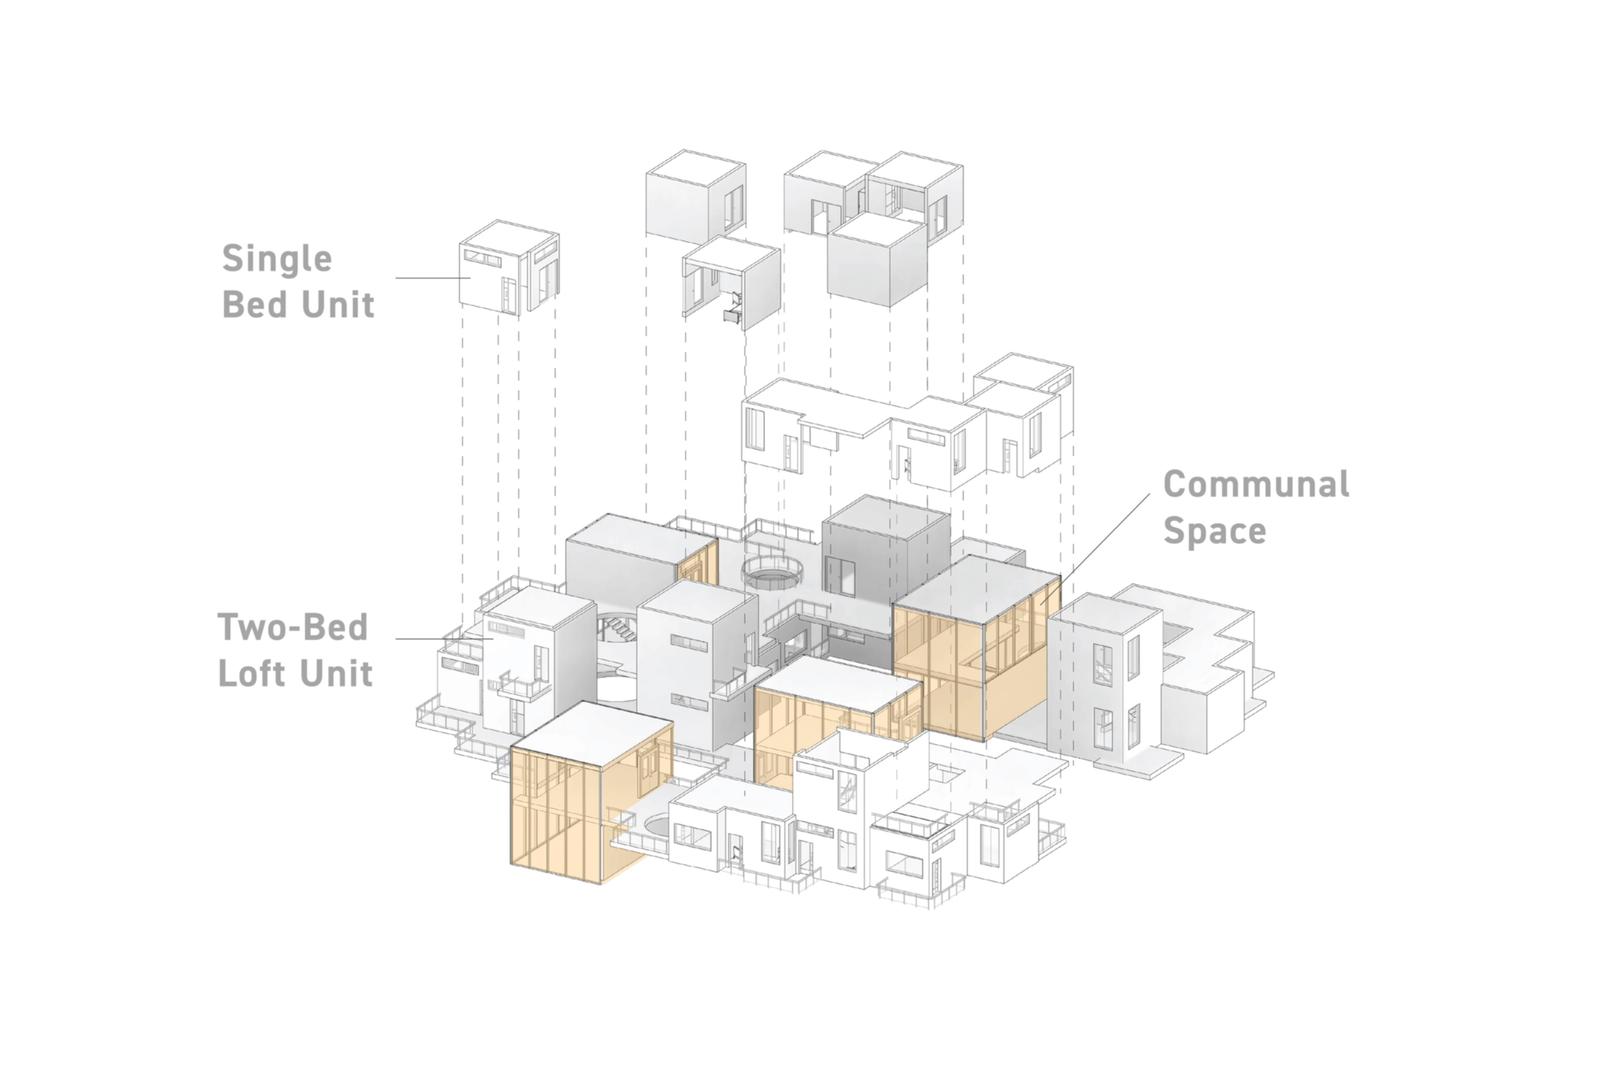 One-bed units above two-bed units and communal spaces